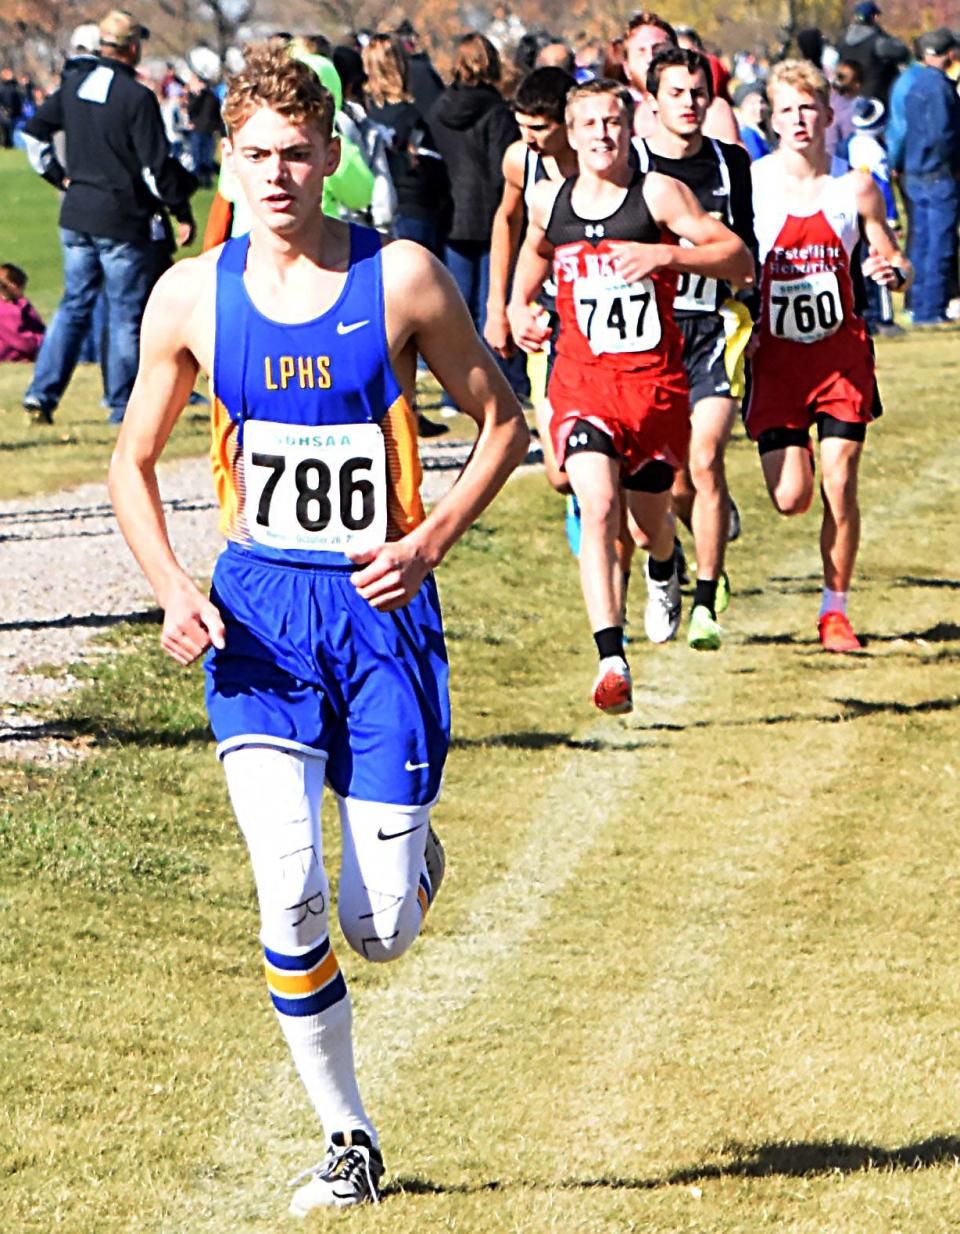 Rhett McMasters of Lake Preston (left) and Riley Benning of Estelline-Hendricks (right) each recorded top-10 finishes in the Class B boys’ race during the 2019 State High School Cross Country Meet at the Broadland Creek Golf Course in Huron. McMasters was fourth and Benning sixth.